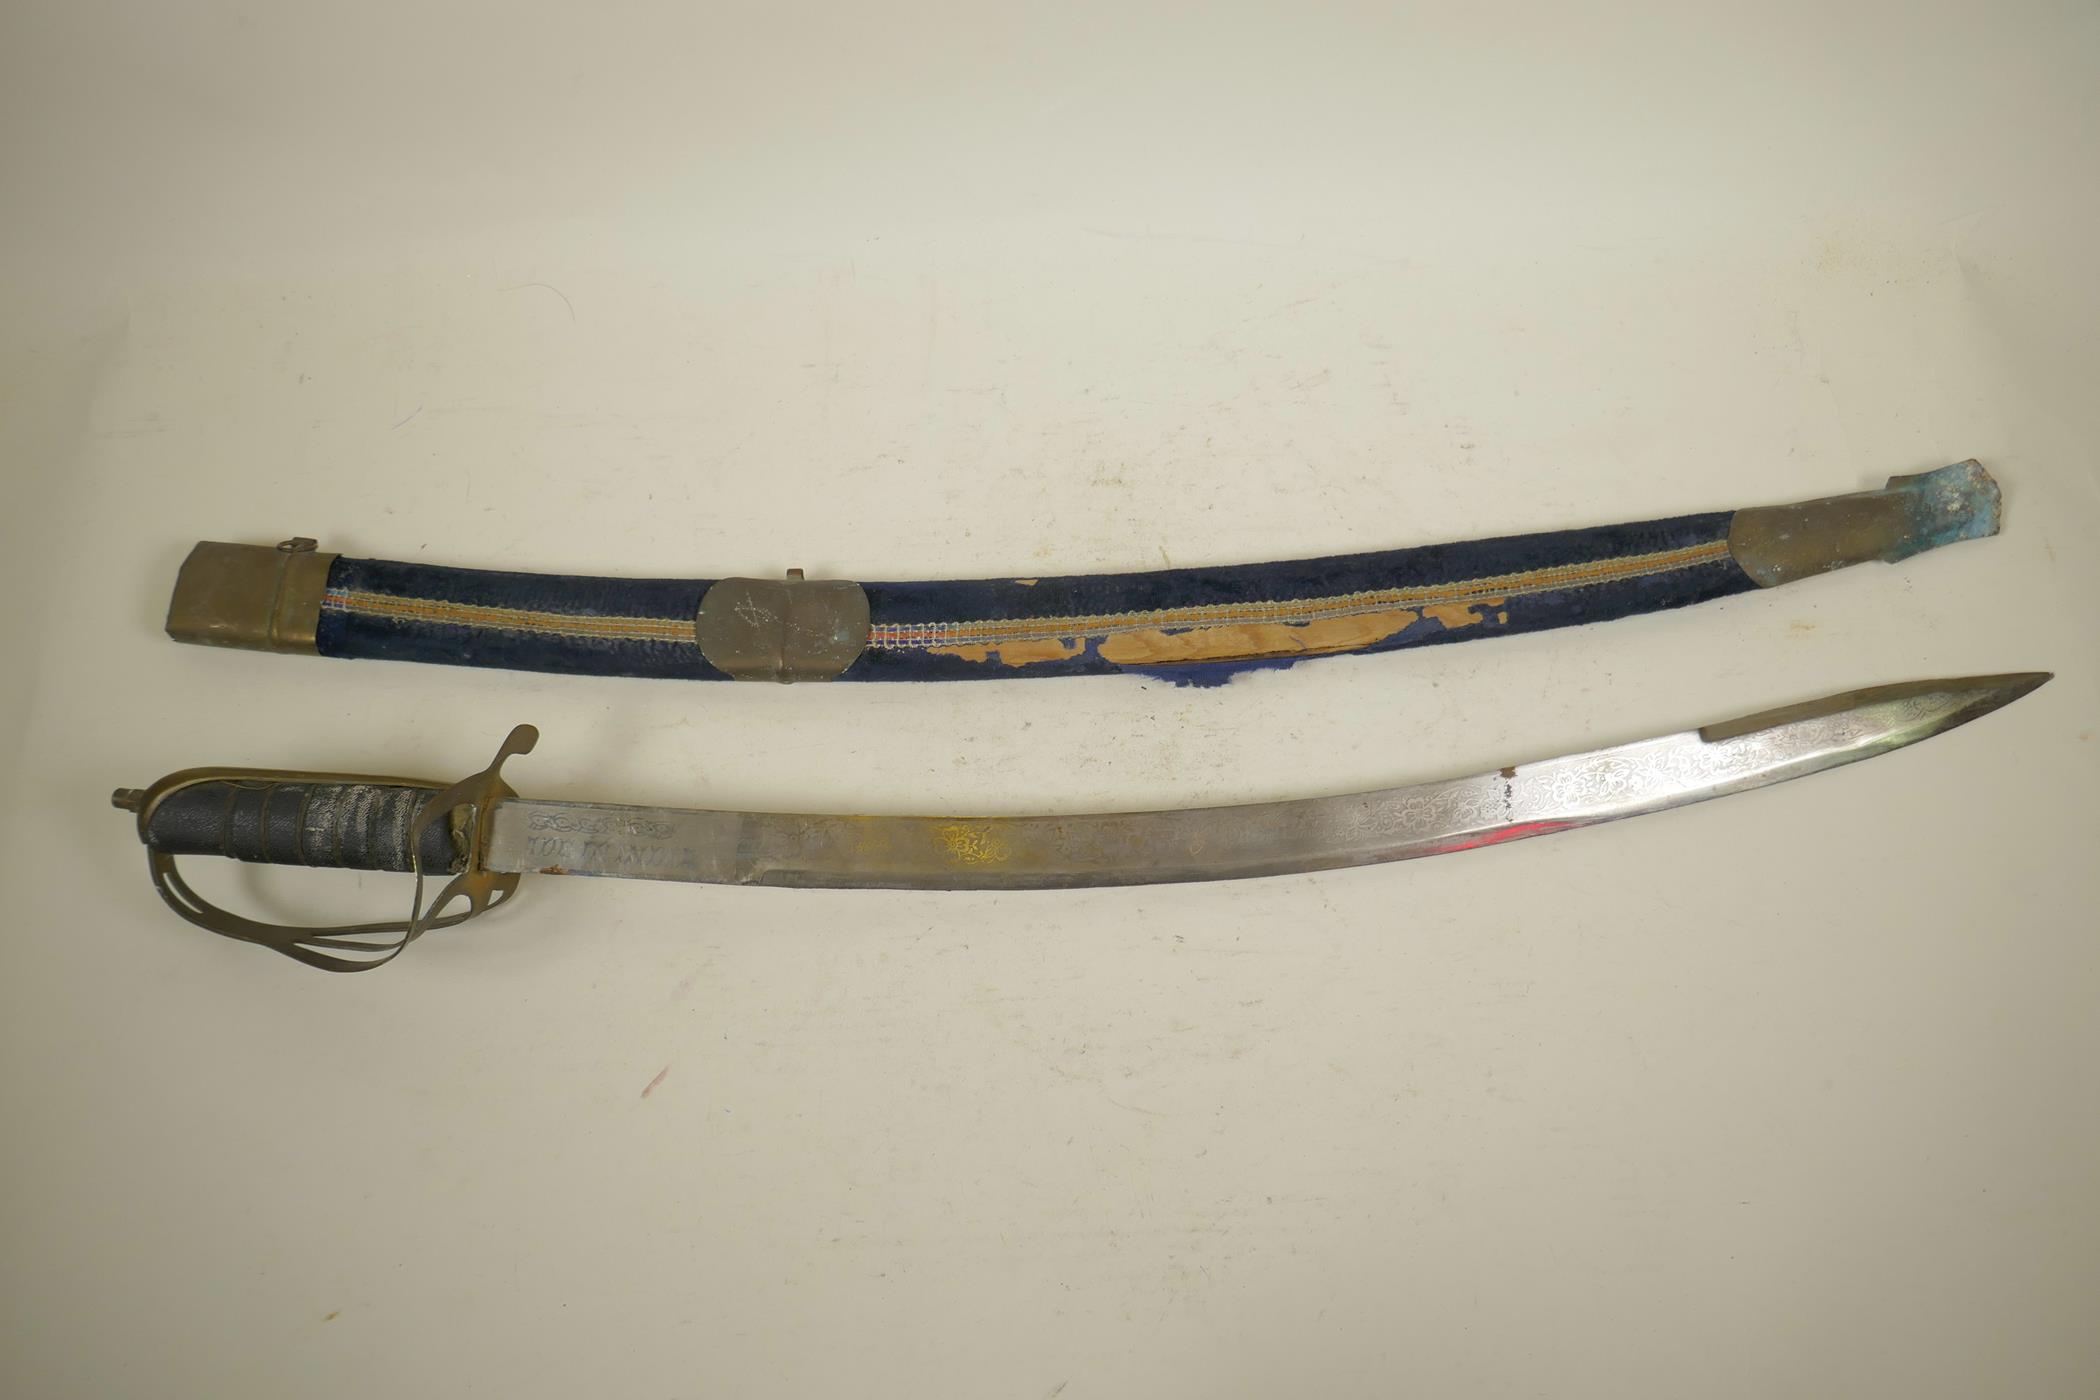 An Indian ceremonial cavalry sword, a WWI replica sabre with 'Made in India' etched to the hilt